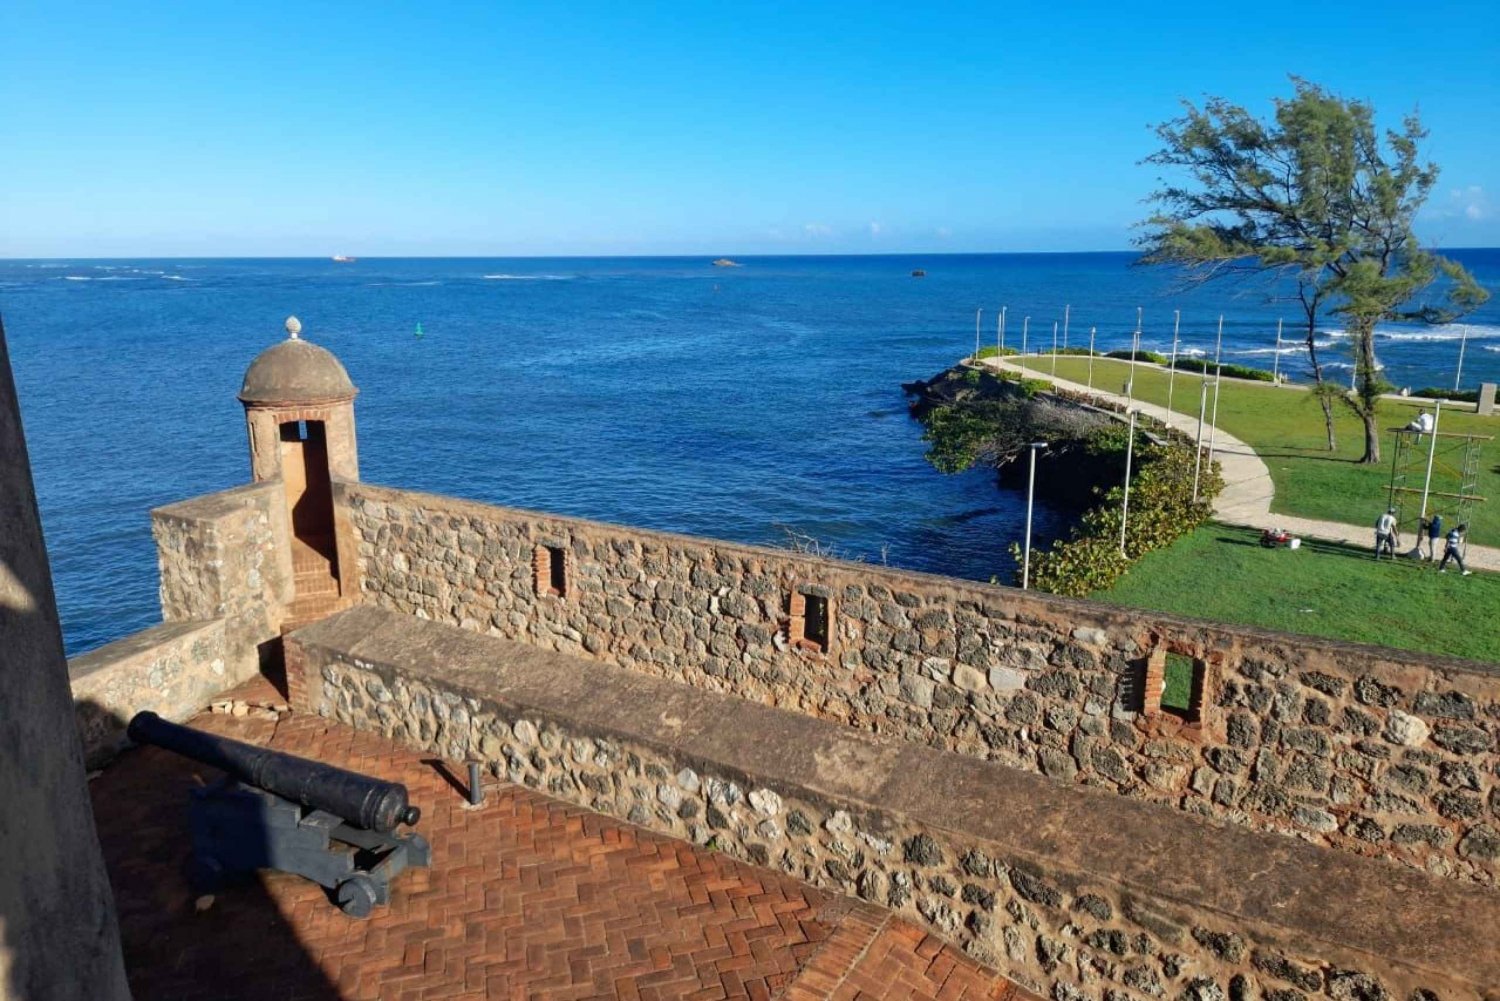 Puerto Plata: Guided Tour with Lunch and Rum Tasting